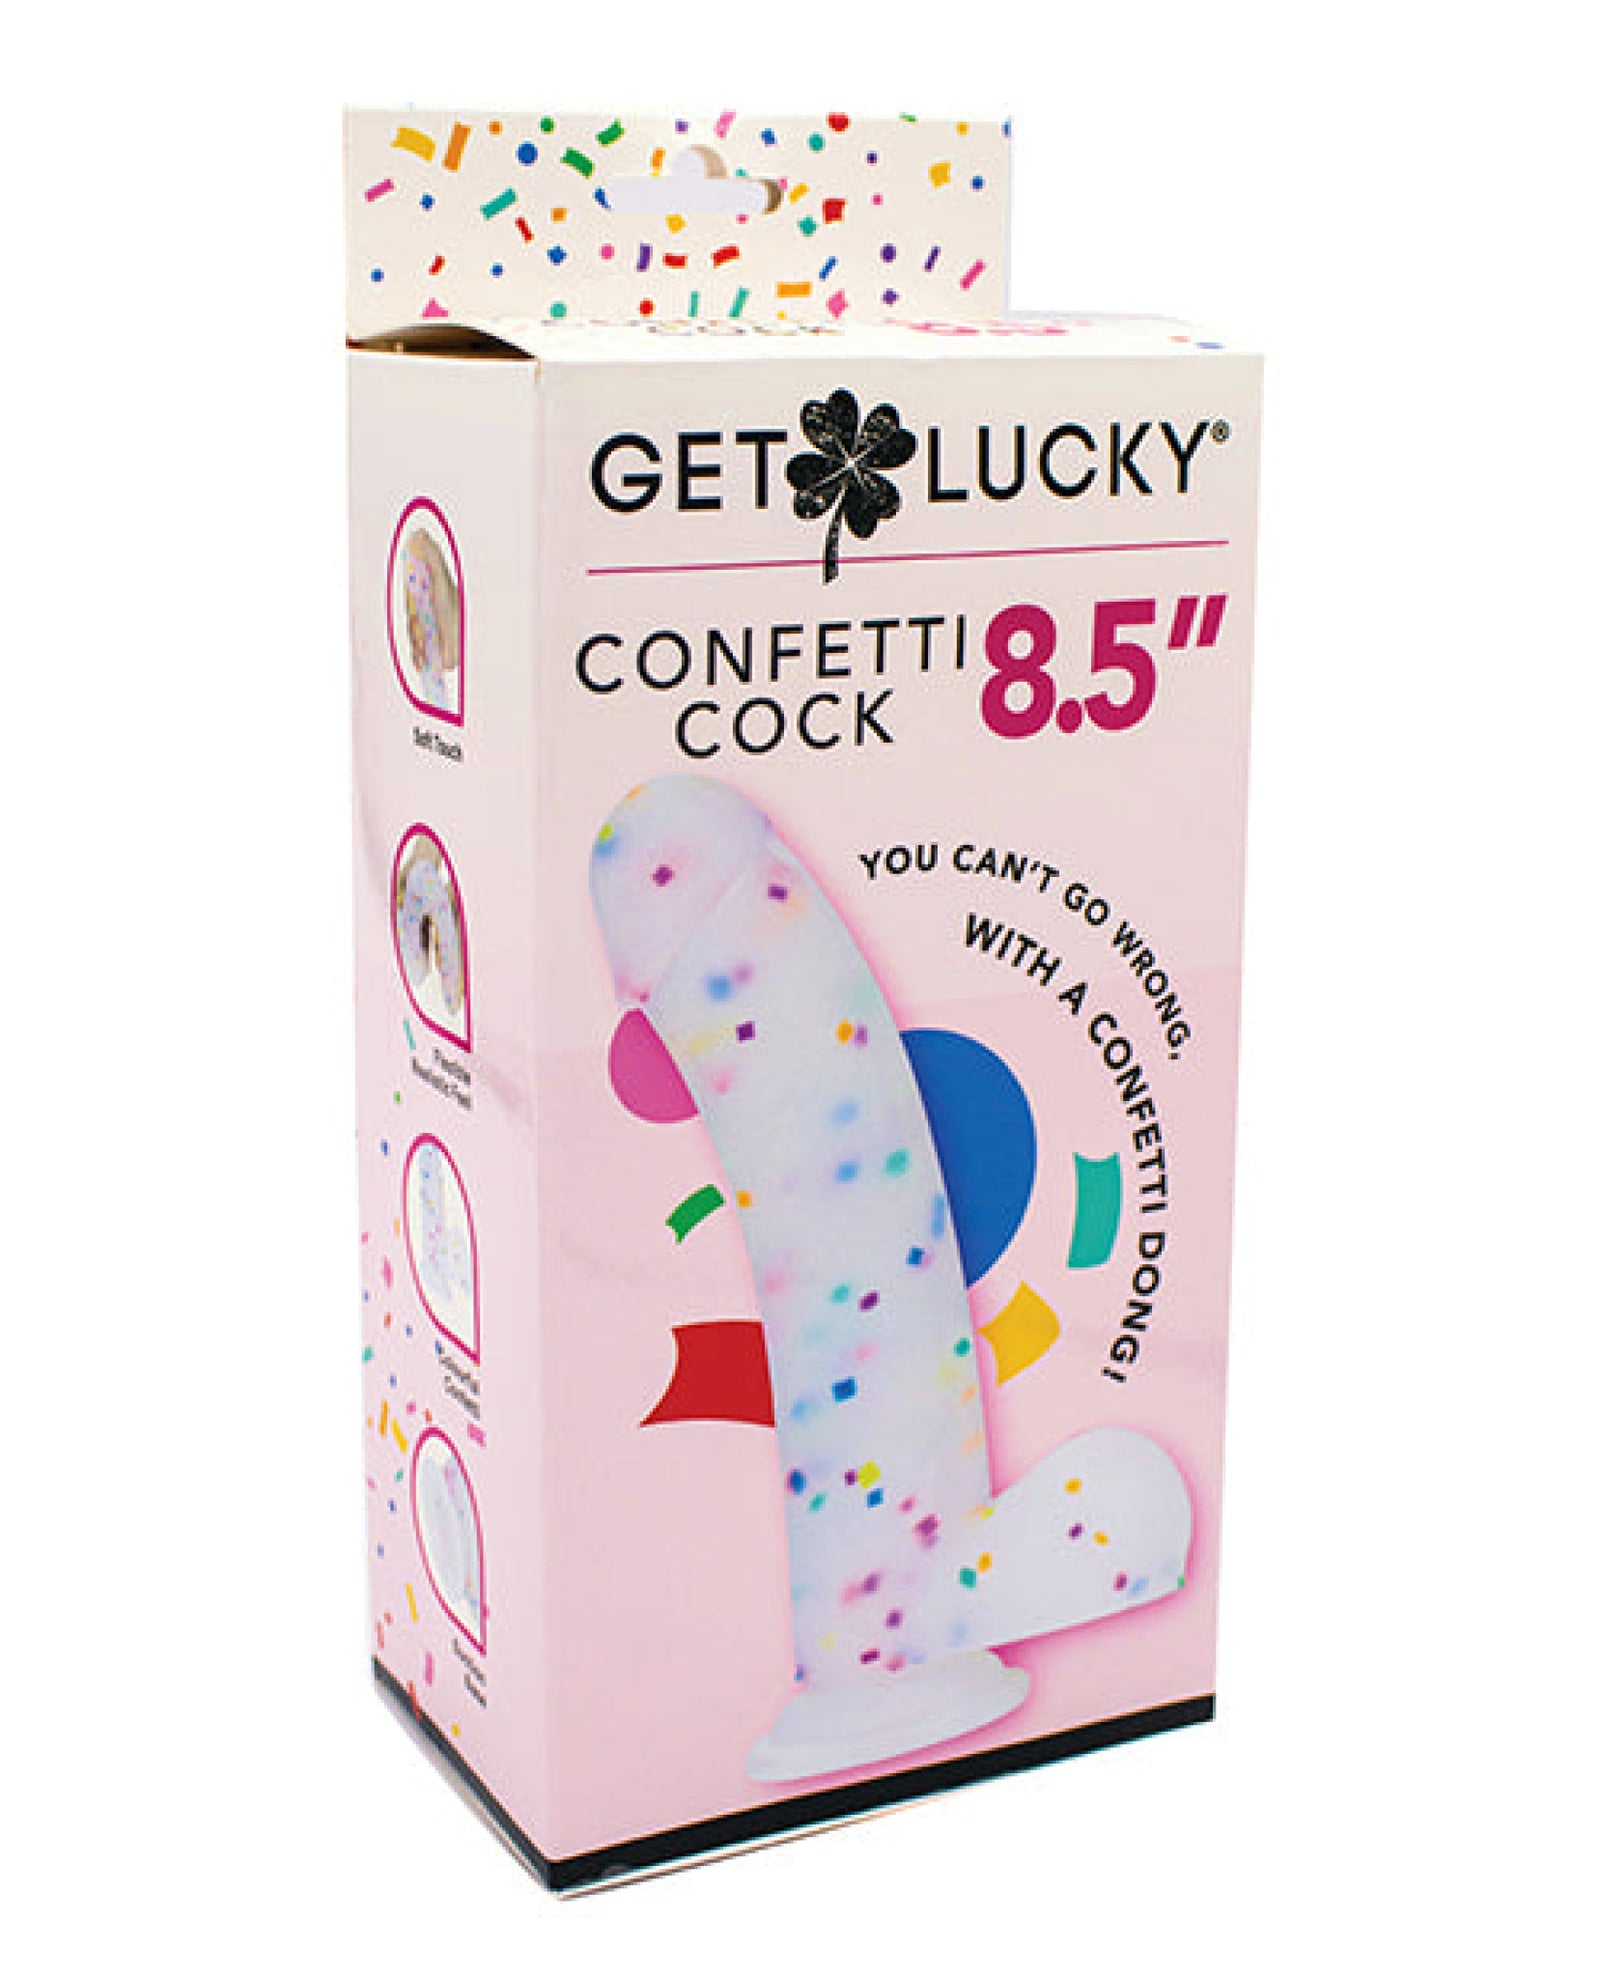 Get Lucky 8.5" Real Skin Confetti Cock - Multi Color Get Lucky